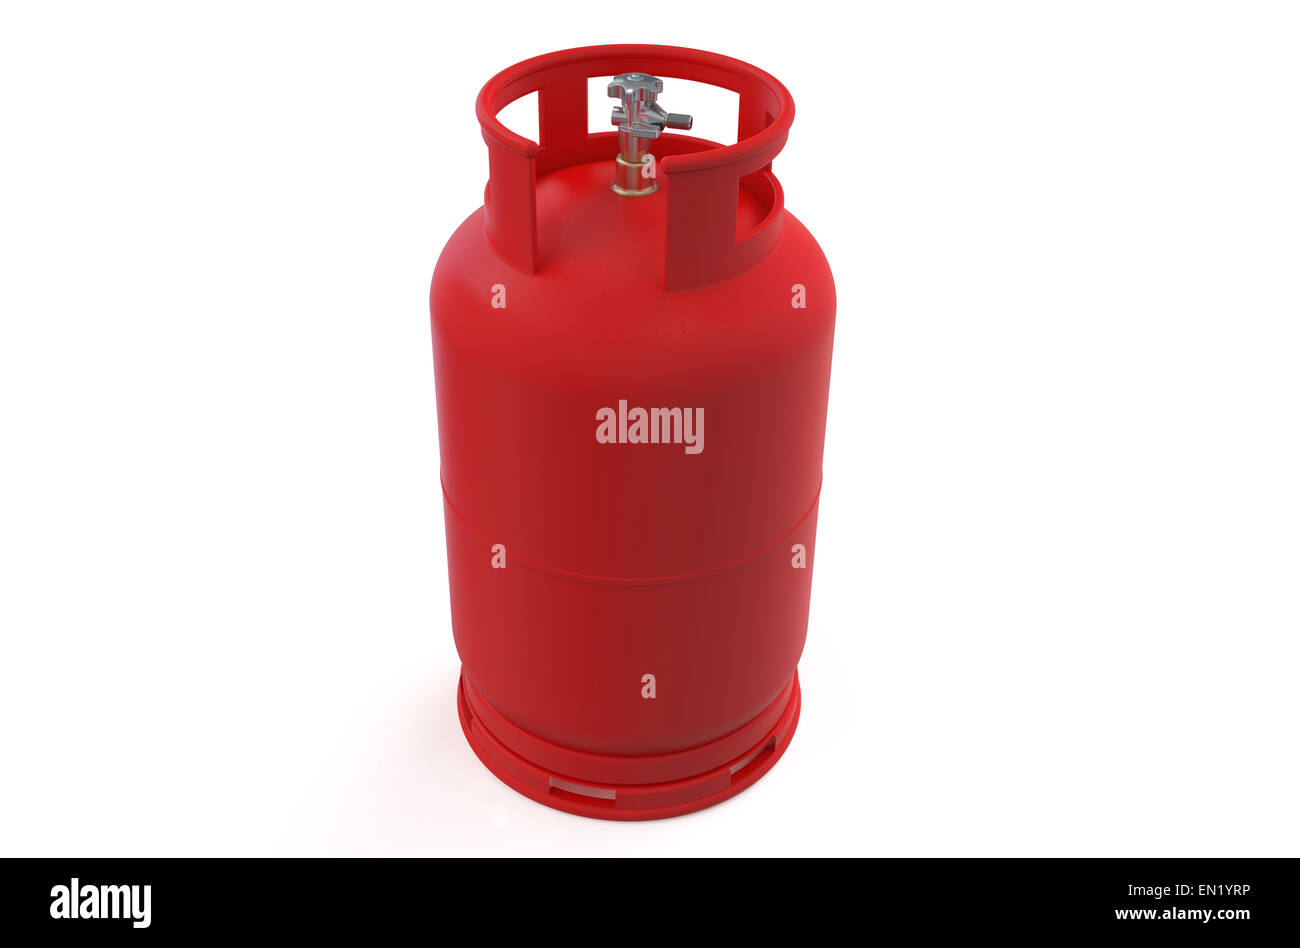 A red gas cylinder isolated on white background Stock Photo